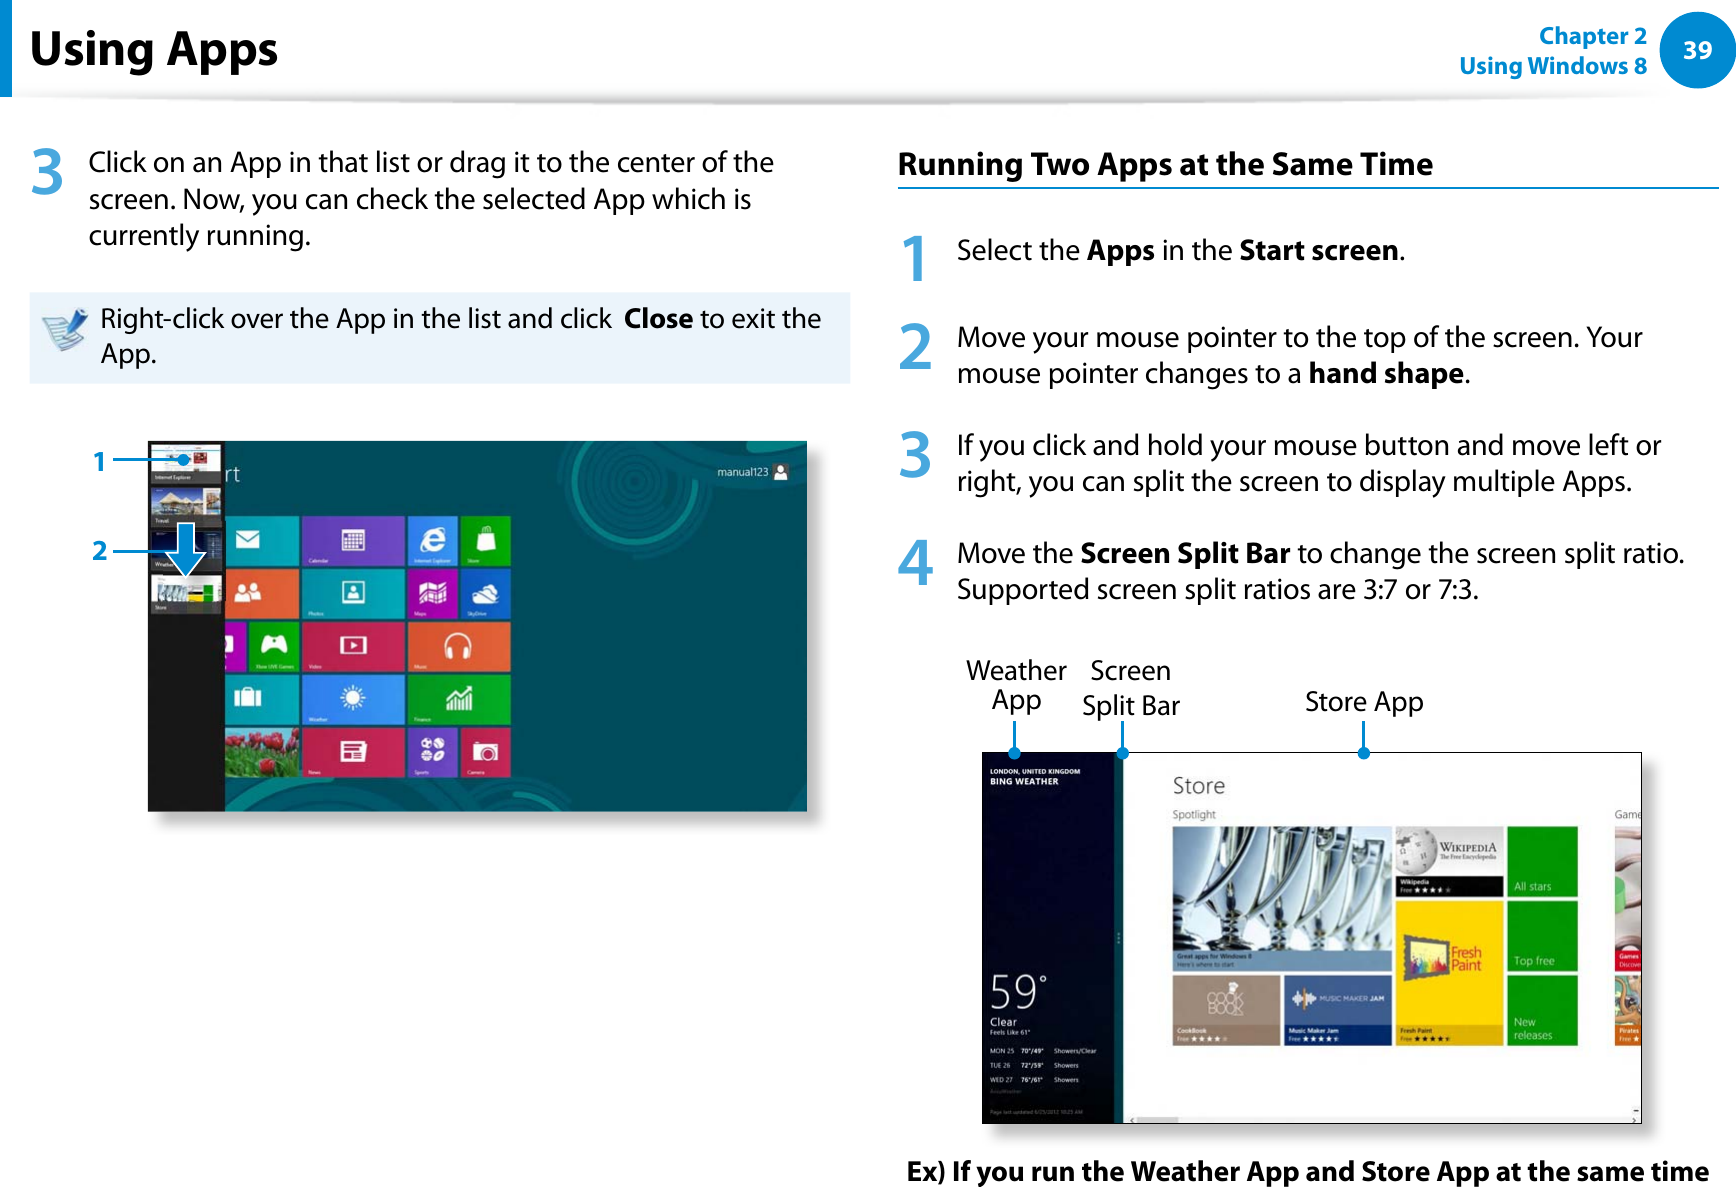 39Chapter 2 Using Windows 8  Using Apps 3  Click on an App in that list or drag it to the center of the screen. Now, you can check the selected App which is currently running.Right-click over the App in the list and click  Close to exit the App.12Running Two Apps at the Same Time1 Select the Apps in the Start screen.2  Move your mouse pointer to the top of the screen. Your mouse pointer changes to a hand shape.3  If you click and hold your mouse button and move left or right, you can split the screen to display multiple Apps.4  Move the Screen Split Bar to change the screen split ratio.  Supported screen split ratios are 3:7 or 7:3.Ex) If you run the Weather App and Store App at the same timeScreen Split Bar Weather App  Store App 